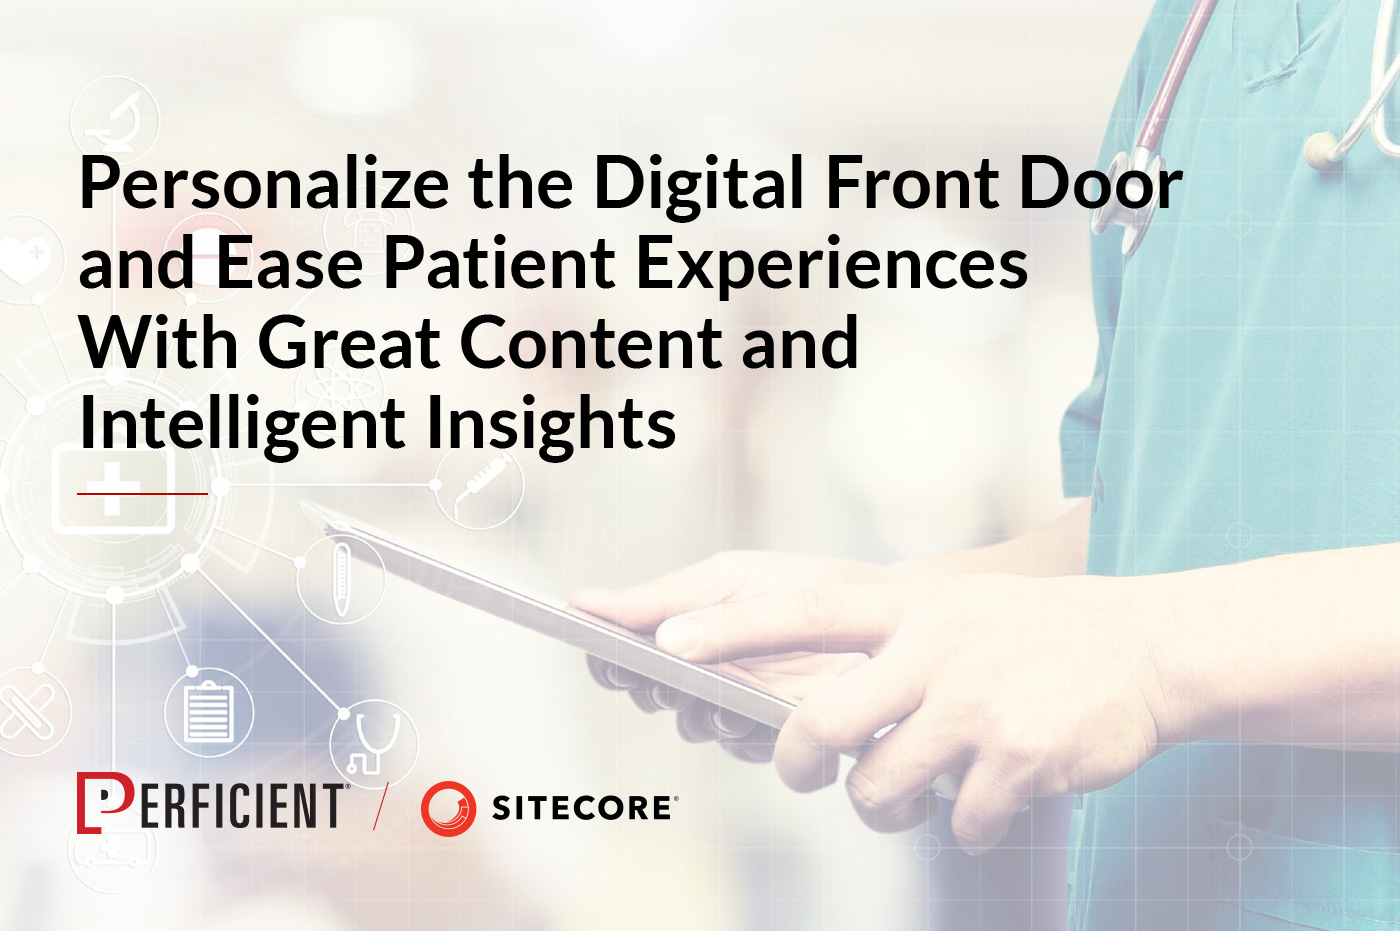 Doctor holding tablet with text Personalize the Digital Front Door and Ease Patient Experiences with Great Content and Intelligent Insights